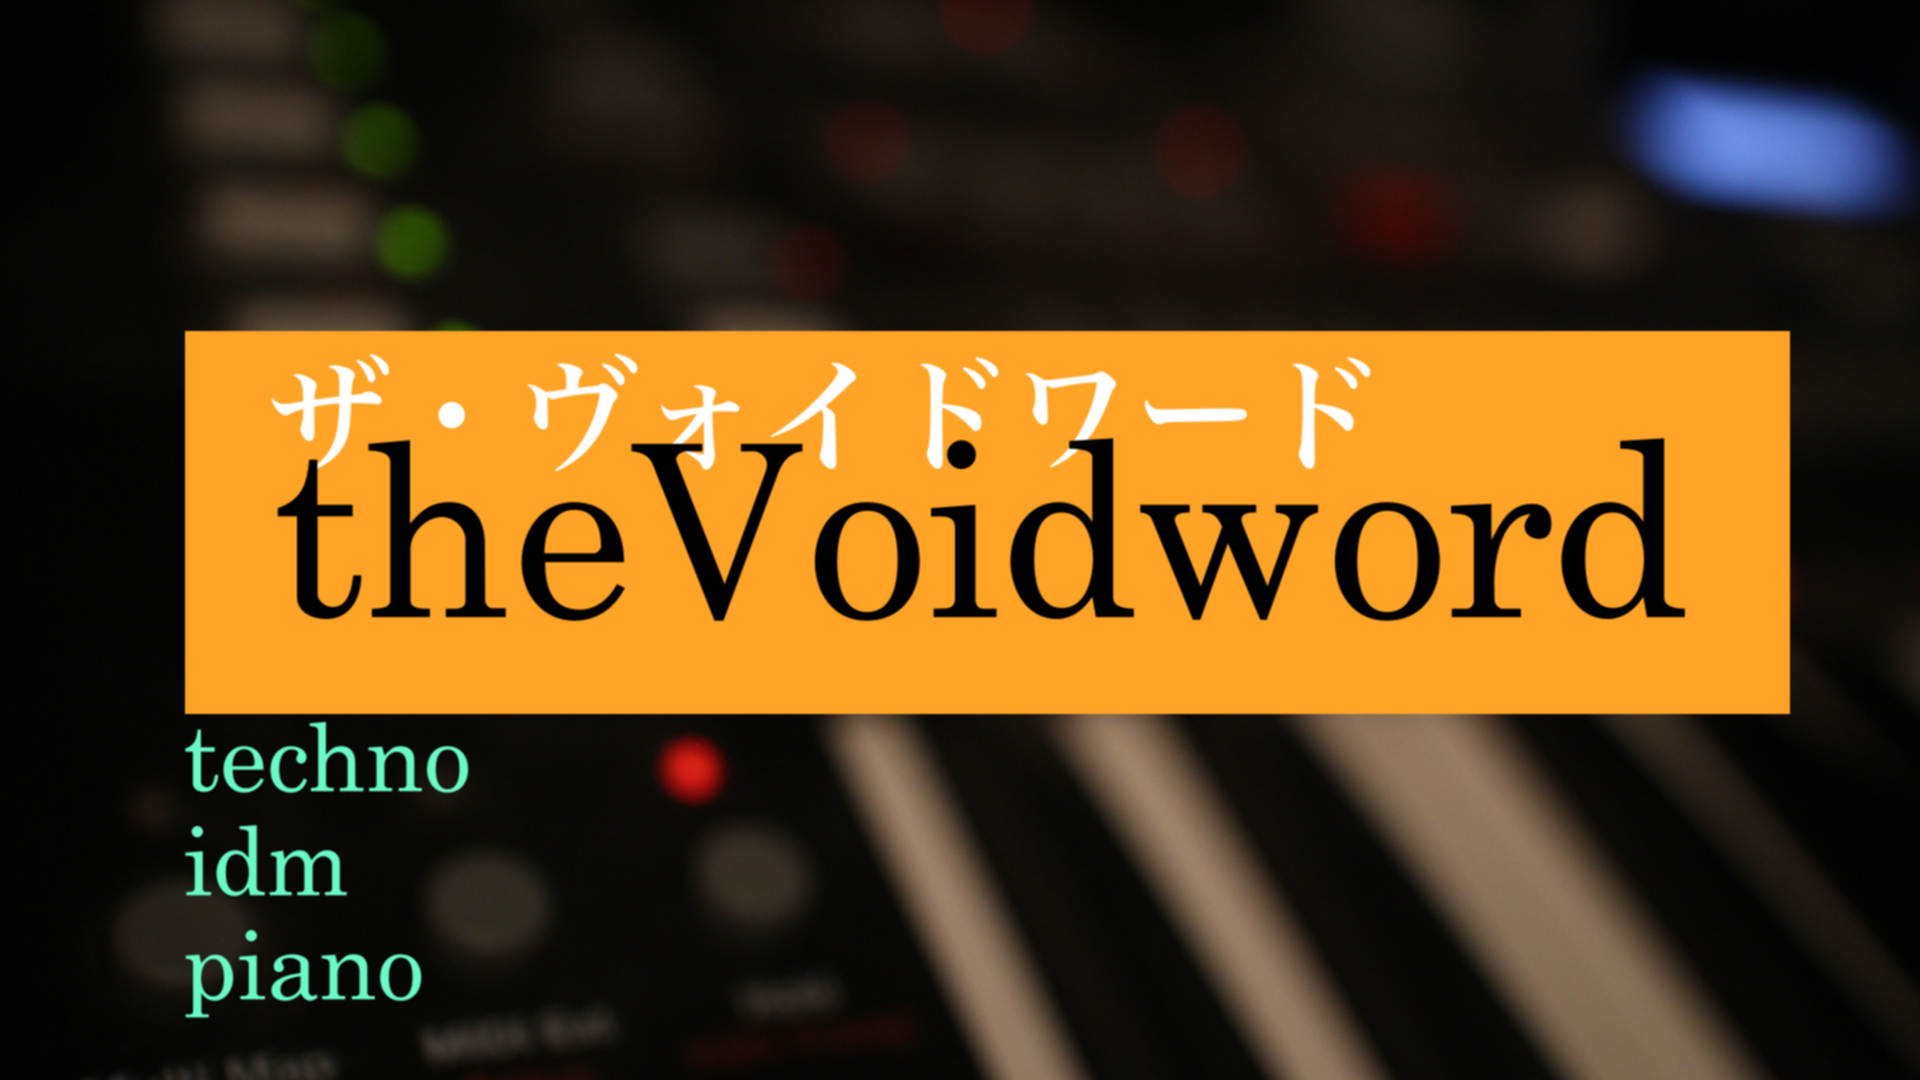 thevoidword